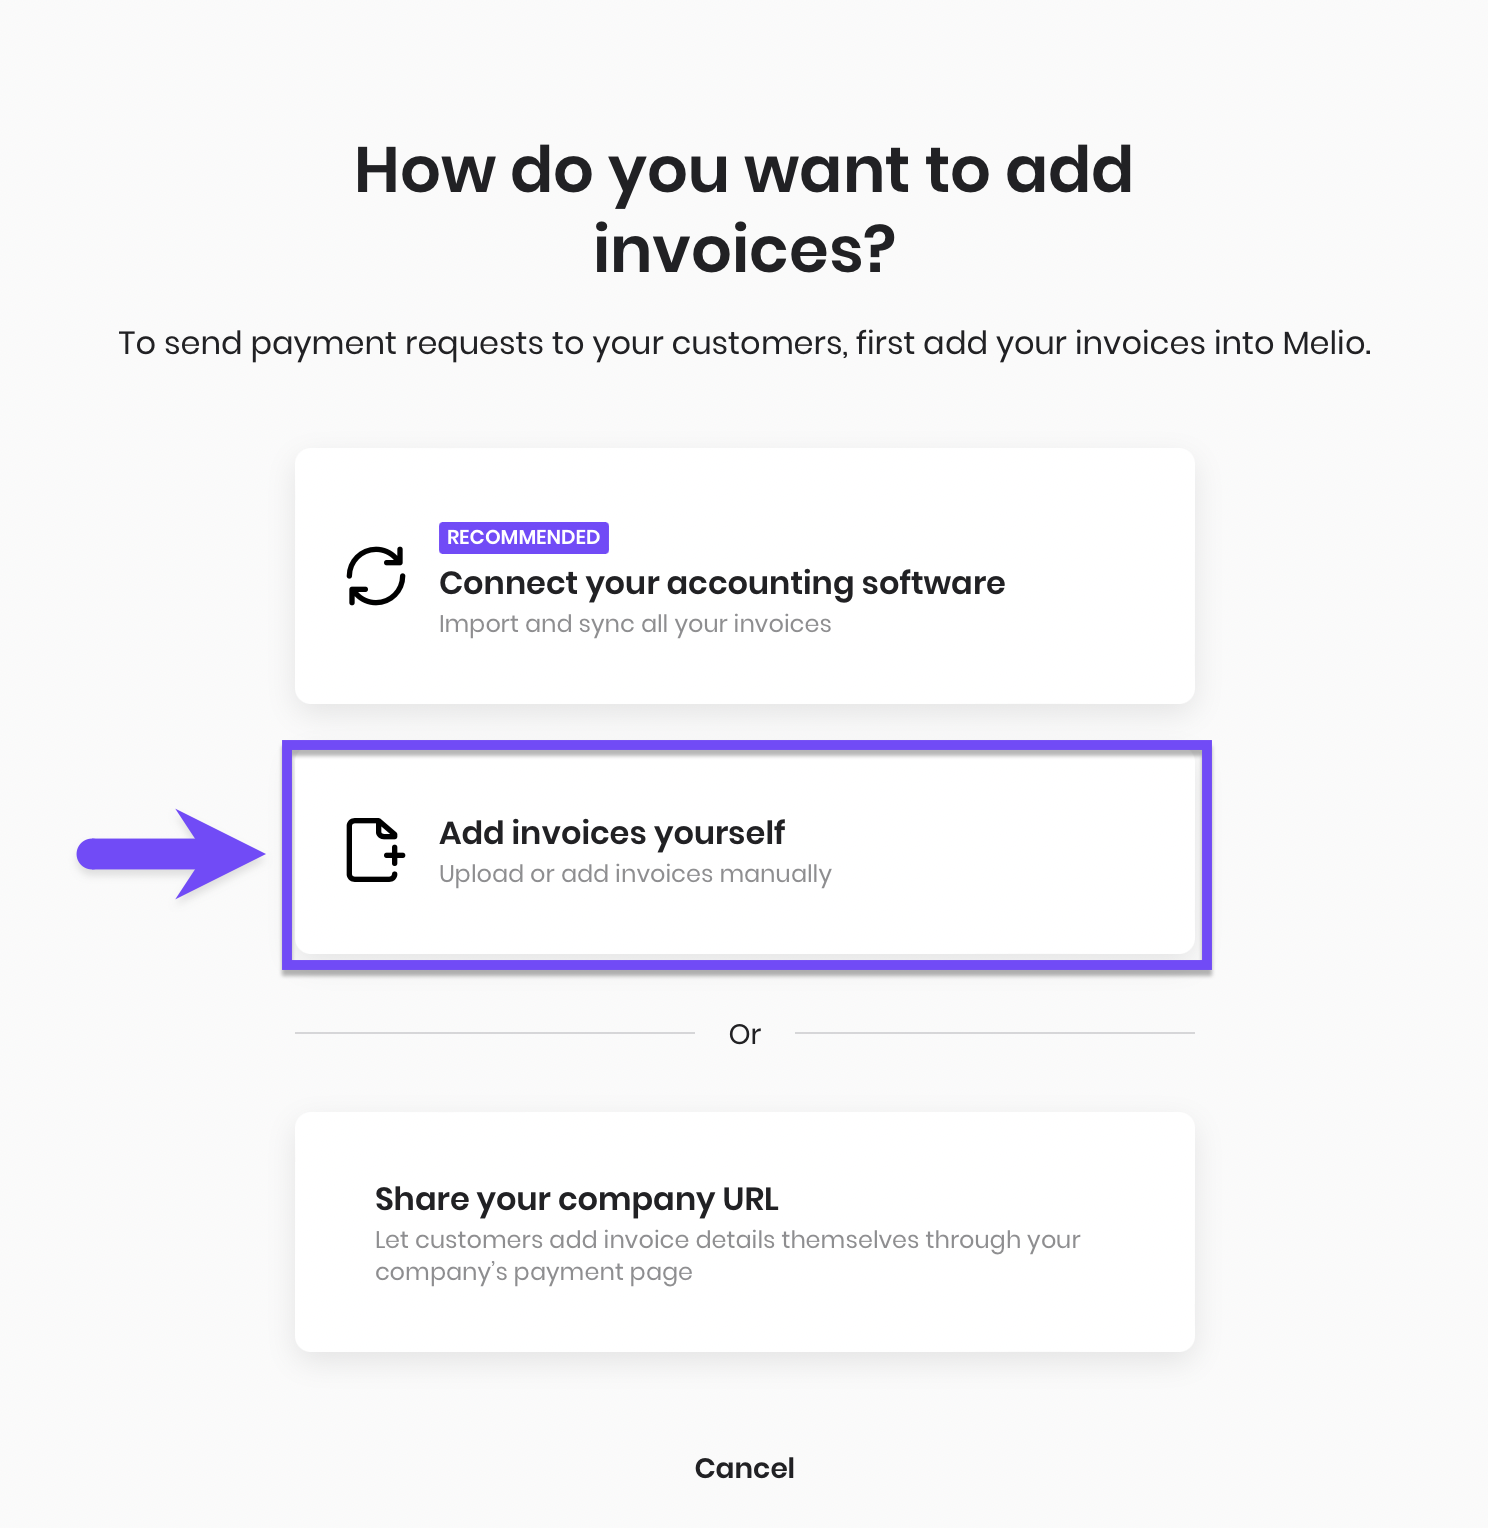 add_invoices_yourself.png